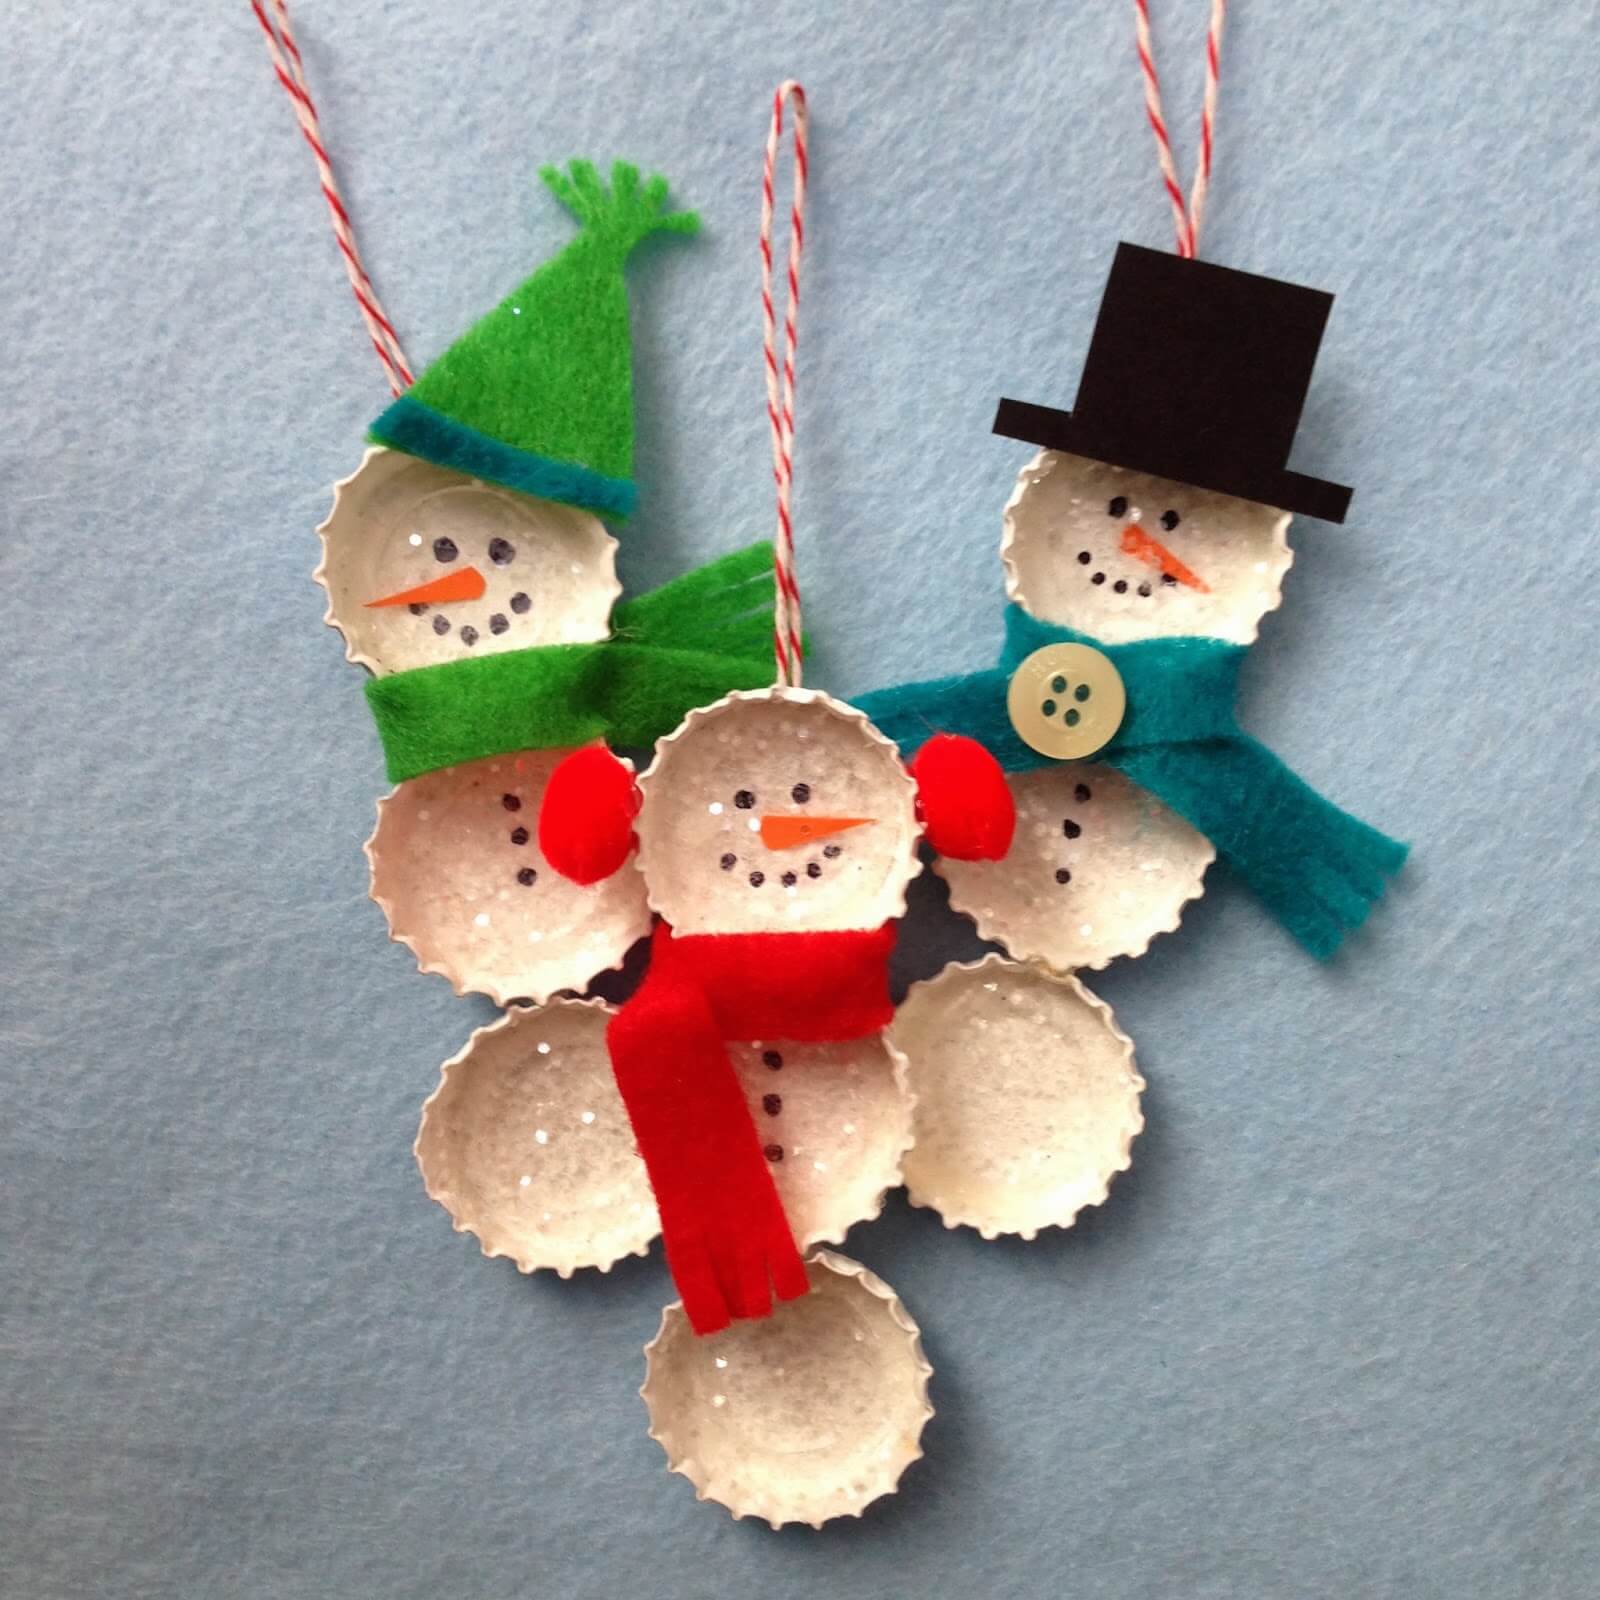 Easy-To-Make Bottle Cap Snowman Ornament Craft Idea For Kids